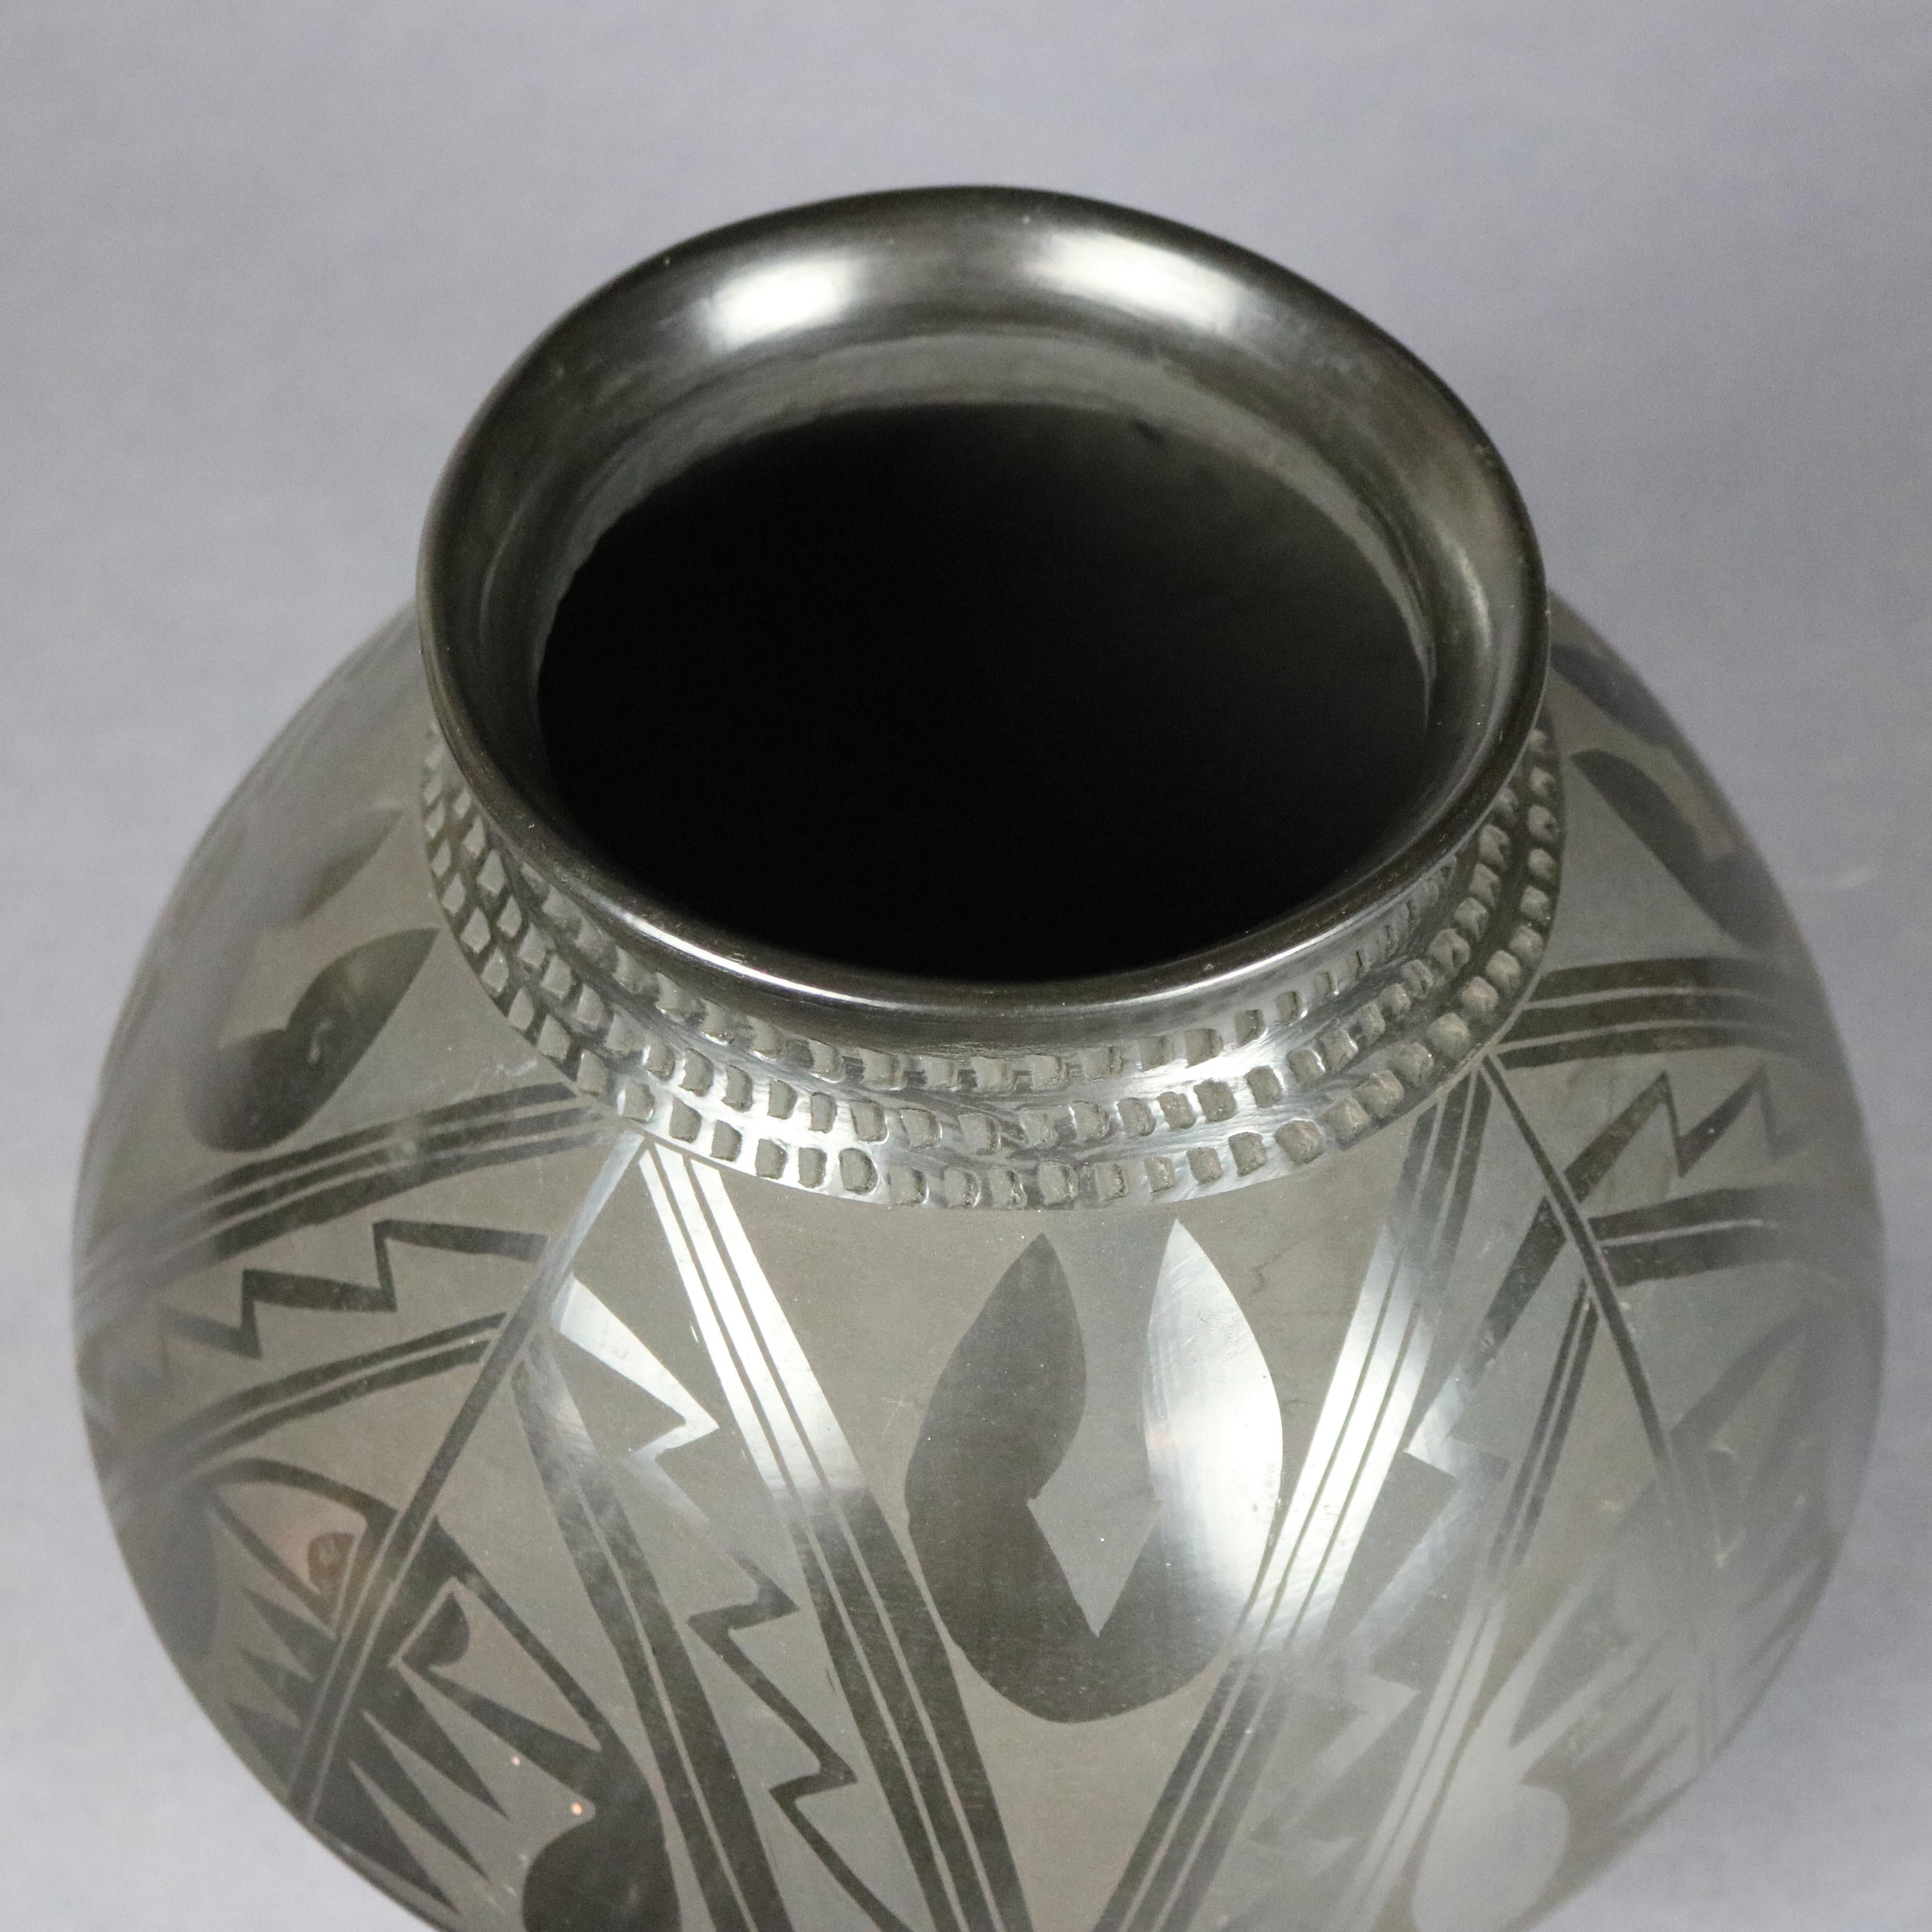 A vintage Native American San Ildefonso olla jar offers blackware pottery construction with engraved geometric design and artist signed on base Julio Silvera, circa 1930

Measures: 8.75